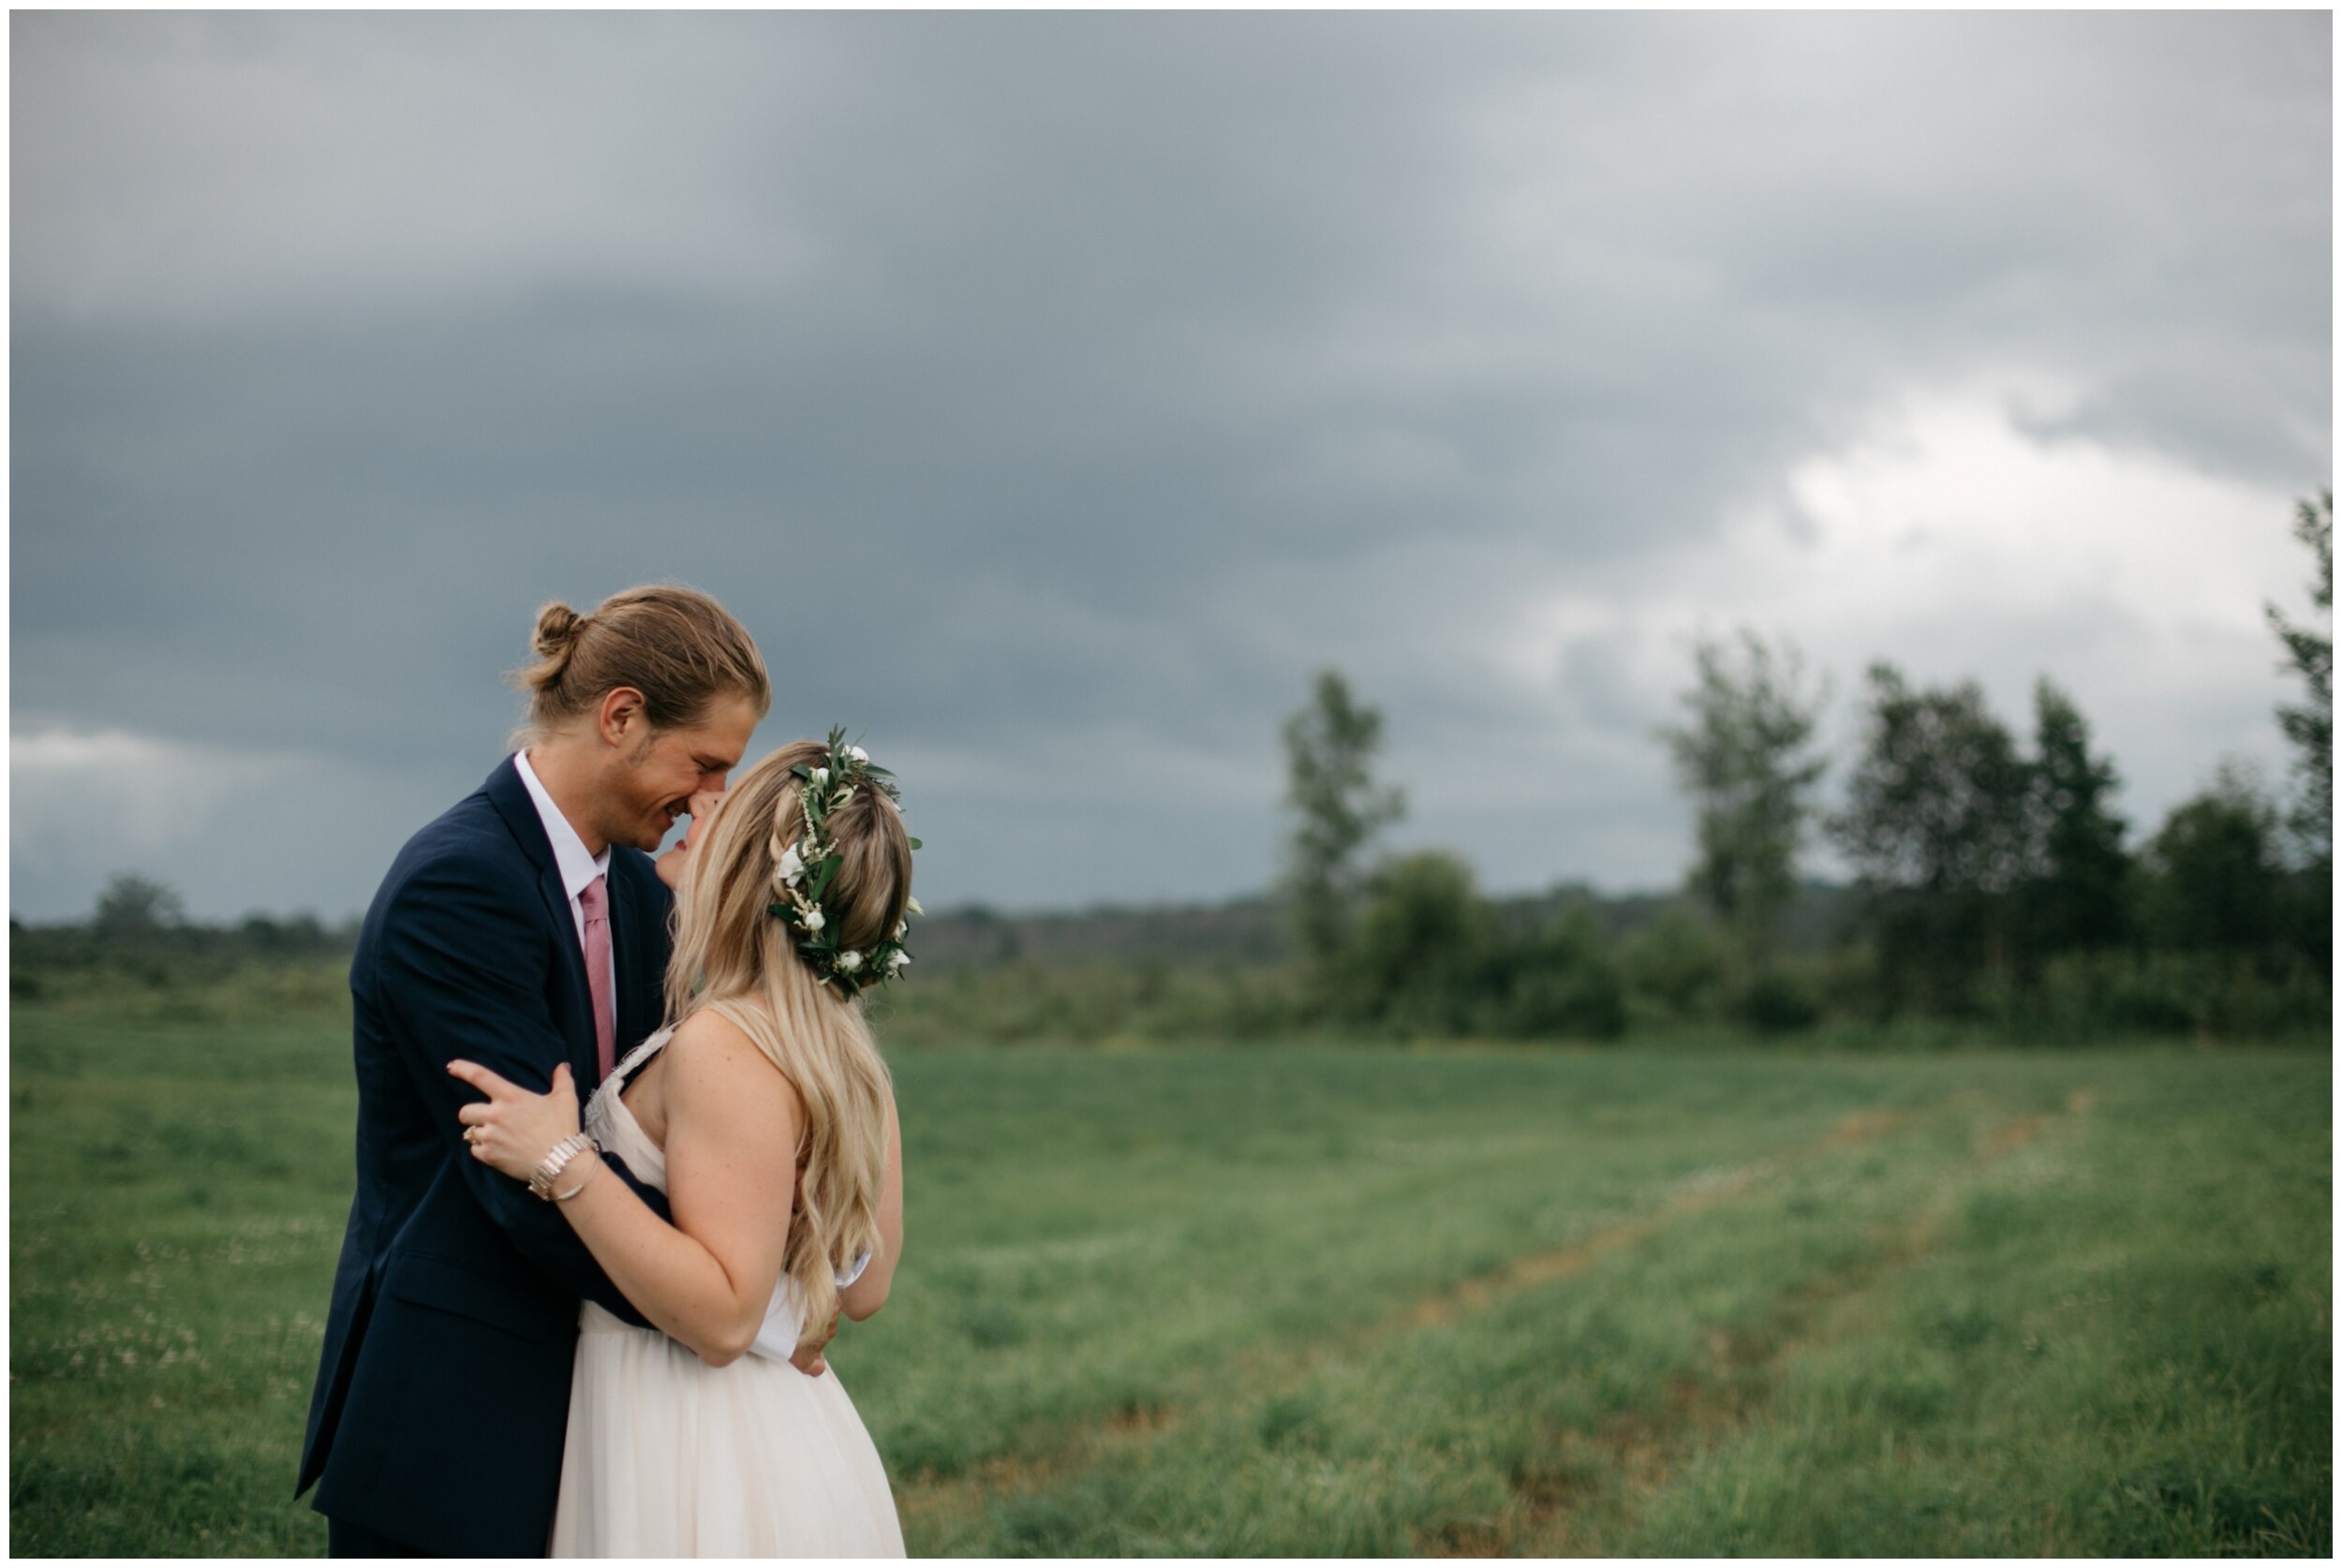 Bride and groom standing in field with stormy sky background at the Northern Pacific Center in Brainerd, Minnesota